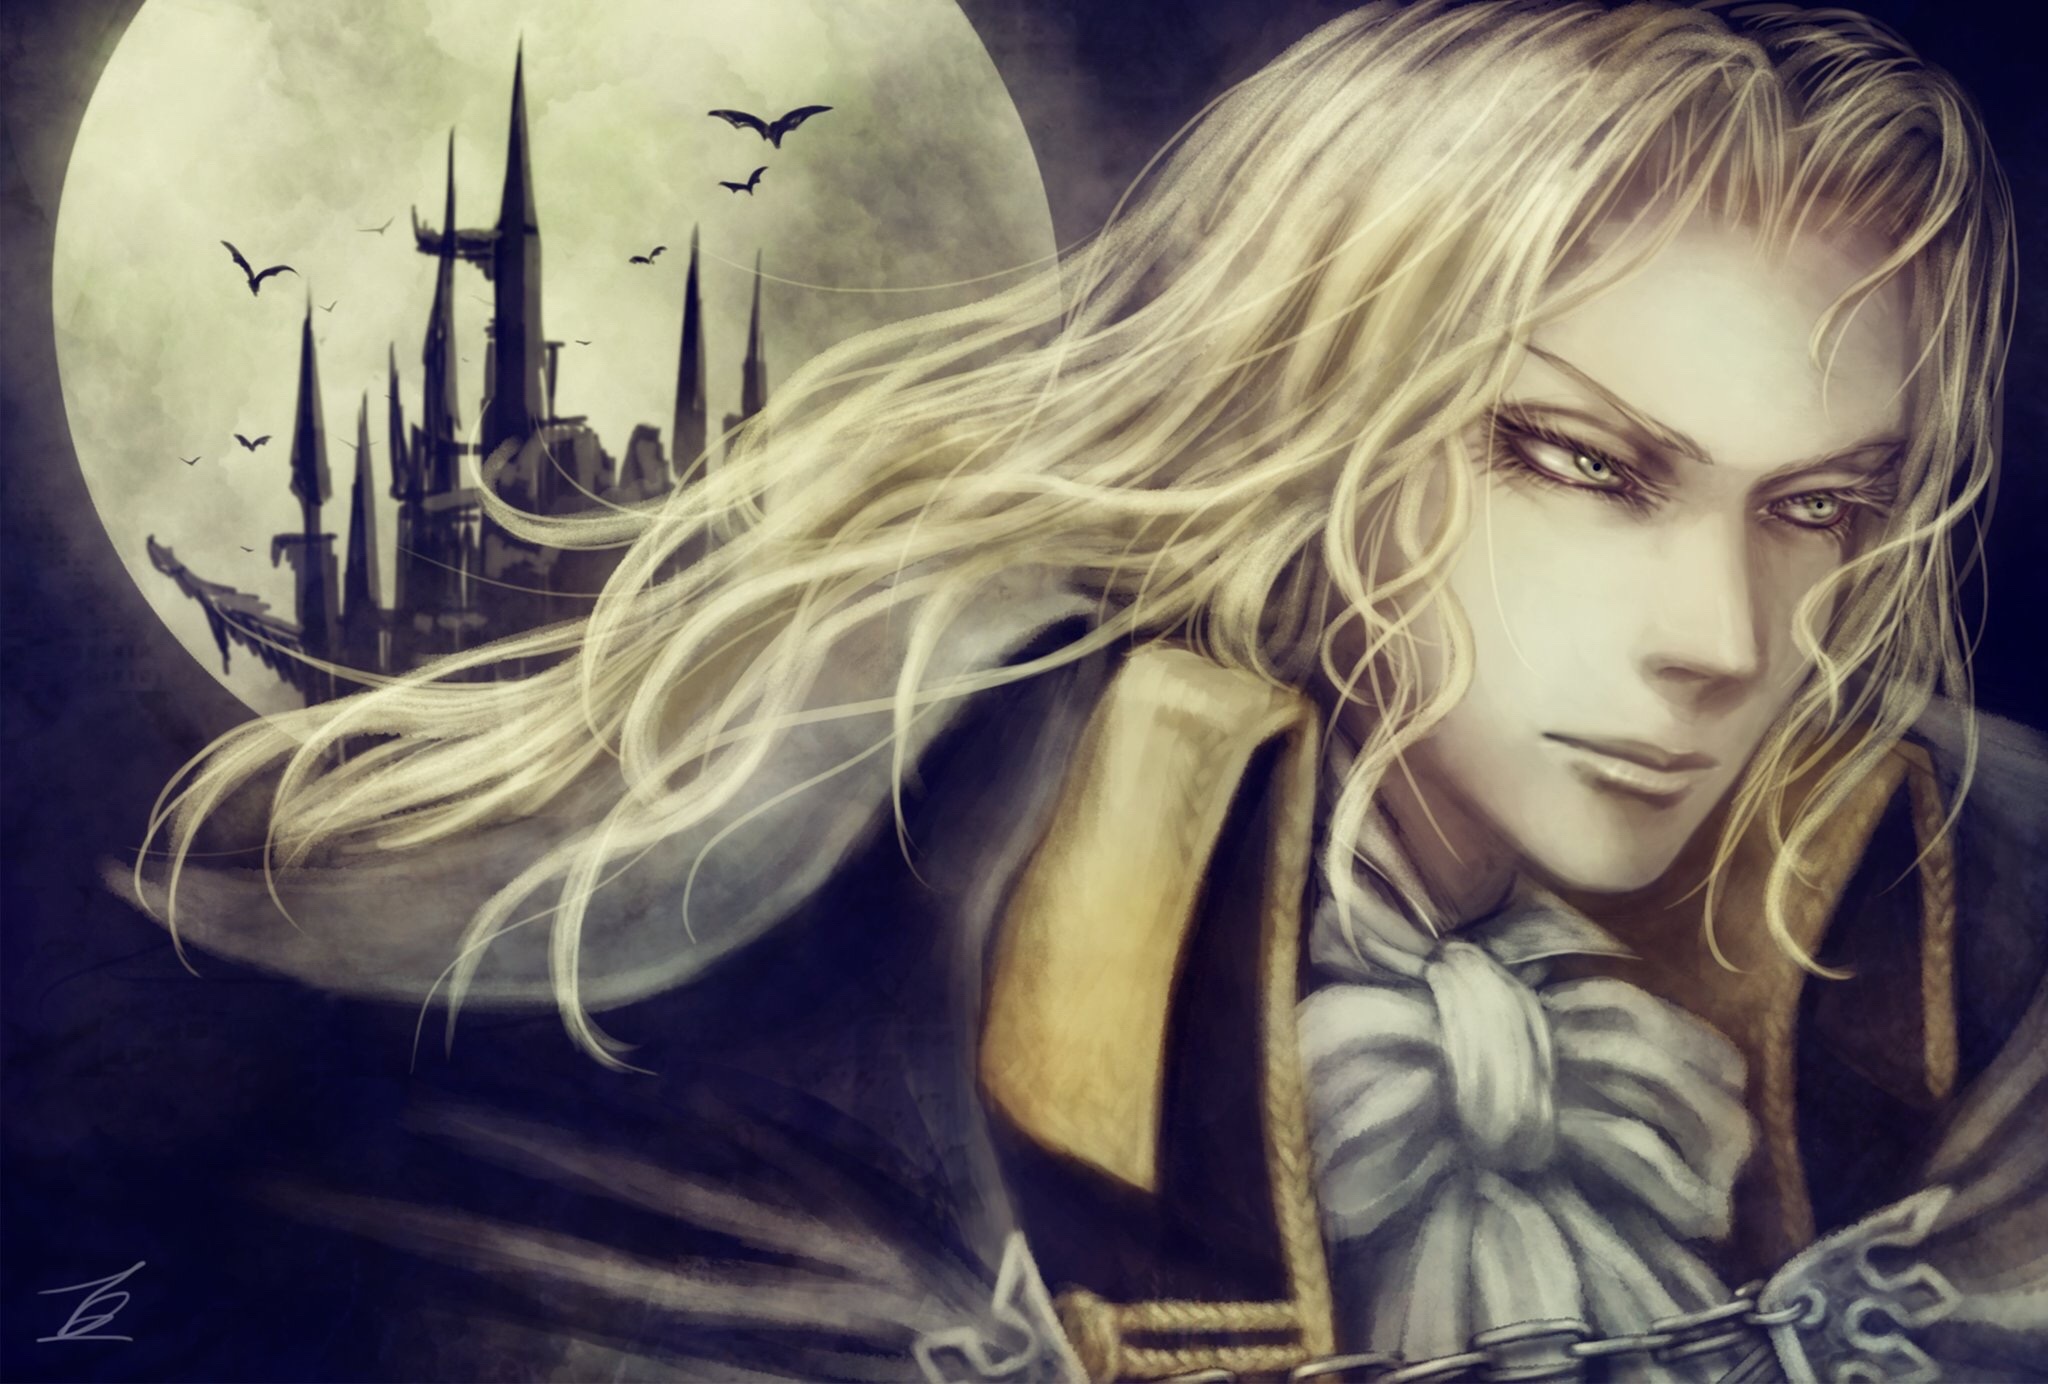 alucard - Image Abyss